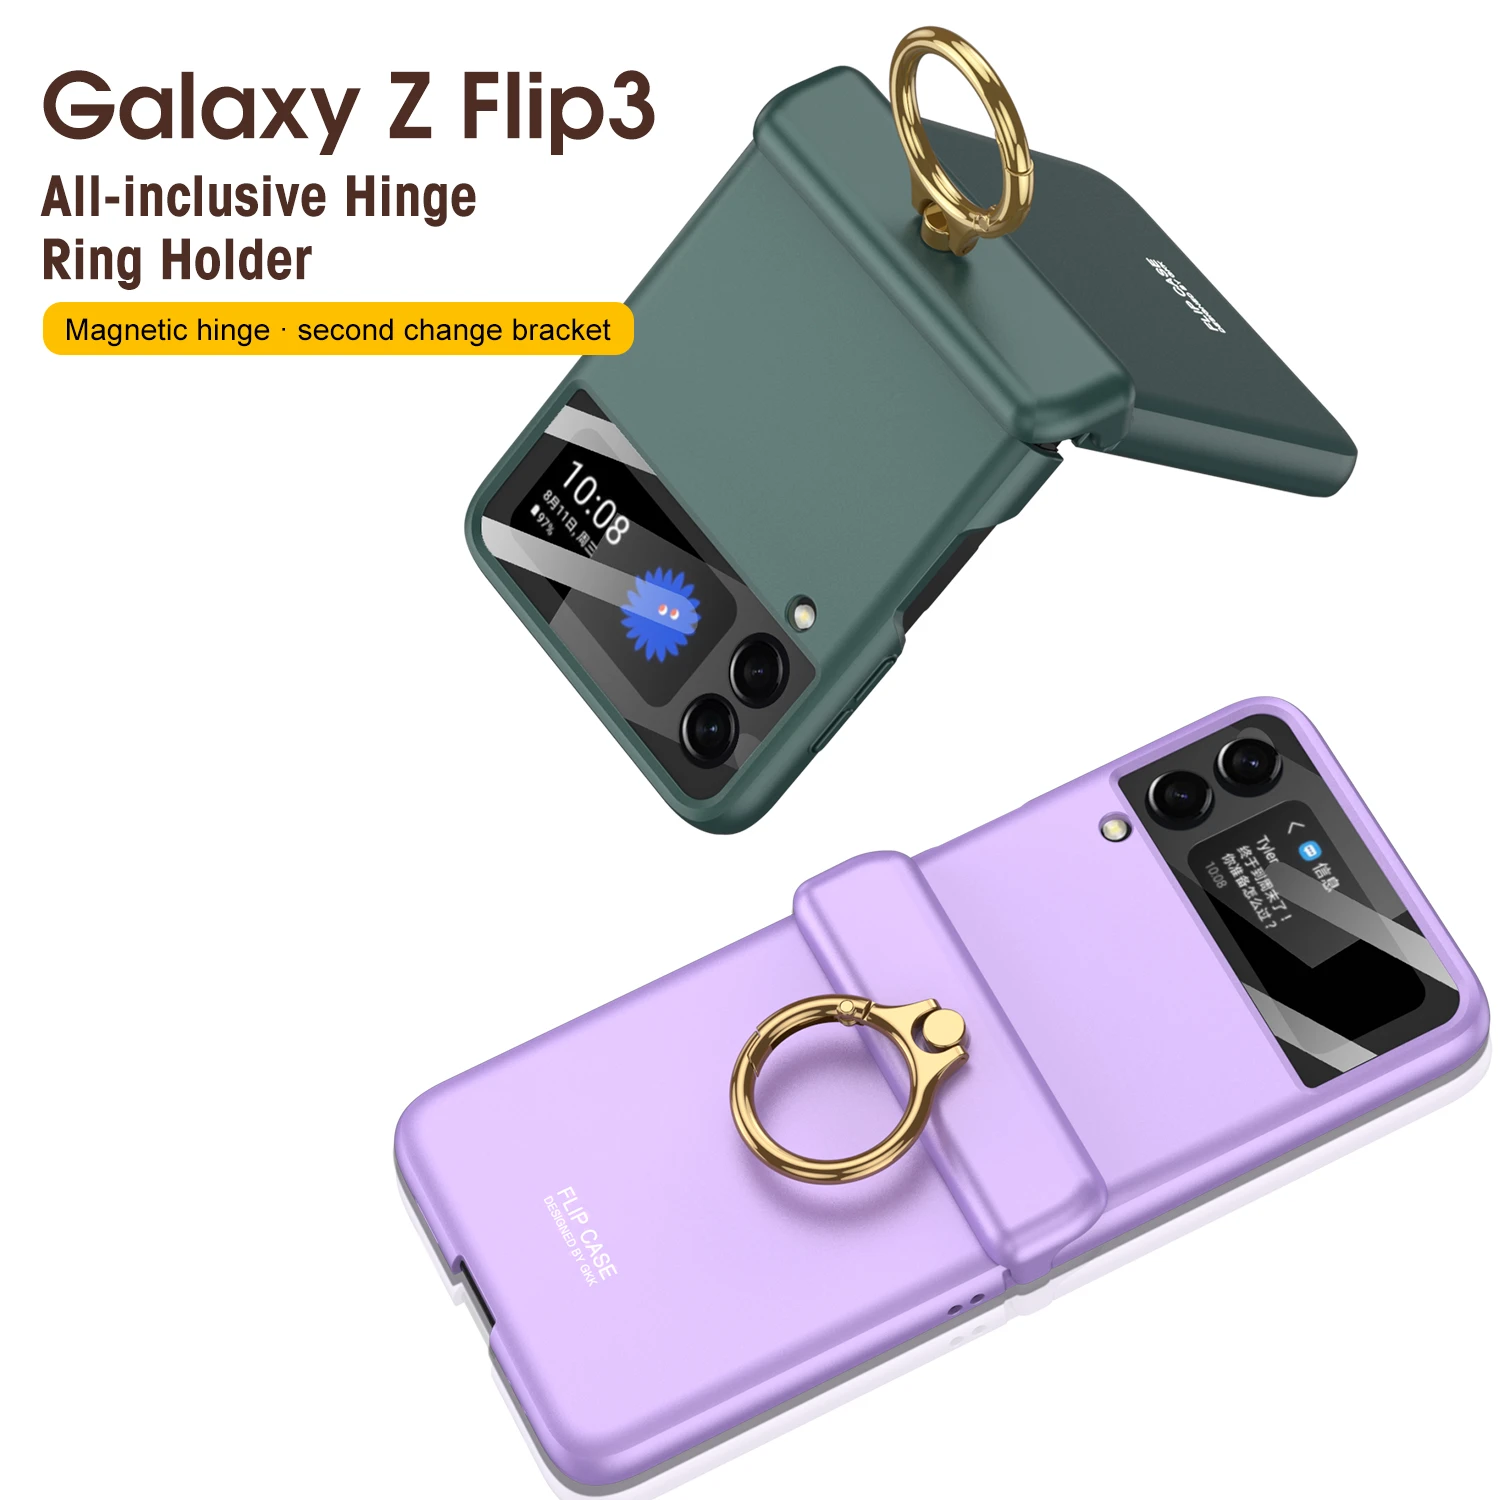 galaxy z flip3 5g case For Samsung Galaxy Z Flip 3 5G Case Luxury Magnetic Hinge All-included Finger Ring Stand Matte Hard Cover For Galaxy Z Flip3 5G samsung flip3 case